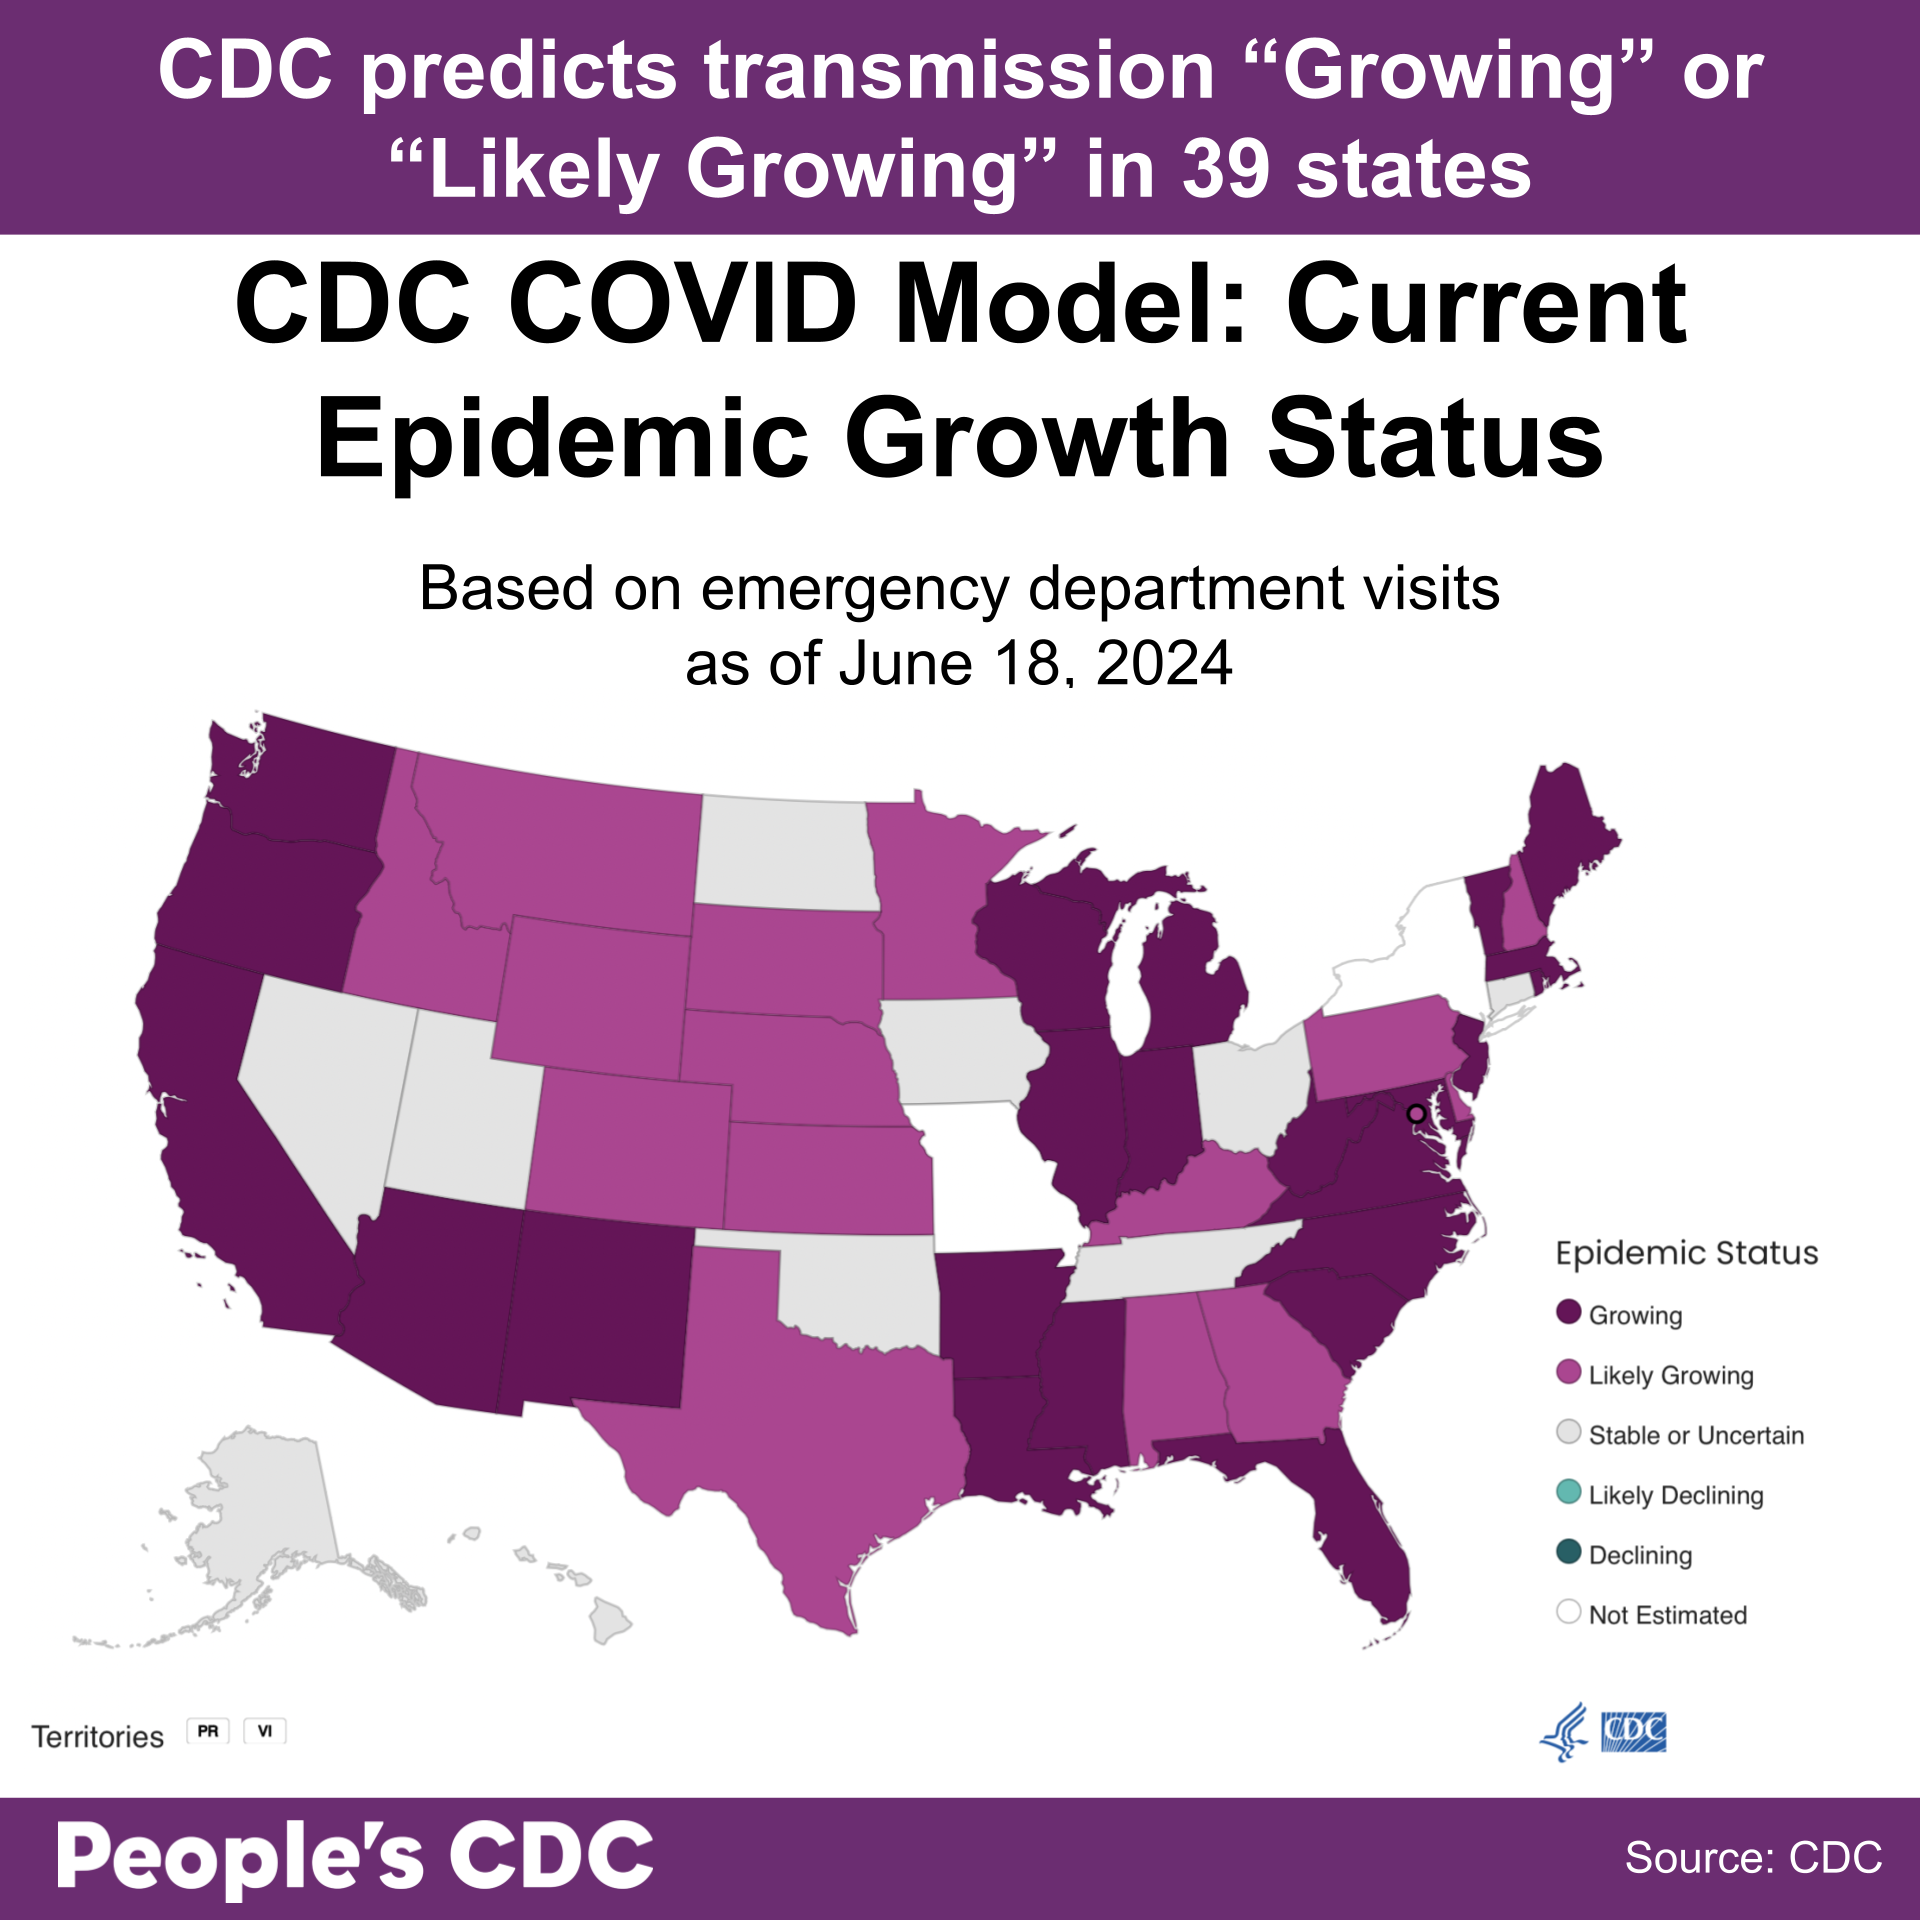 A map of the United States color-coded in shades of purple and gray displaying the CDC COVID Model: Current Epidemic Growth Status based on emergency department visits as of June 18, 2024, where deeper tones correlate to higher rates of growth and gray indicates “Stable or Uncertain”. States without predictions are represented in white. 39 States are “Growing” or “Likely Growing”. 10 States are “Stable or Uncertain” and 4 states and territories did not receive estimates. Text above map reads “CDC Predicts transmission is “Growing” or “Likely Growing” in 39 states” People’s CDC. Source: CDC.”